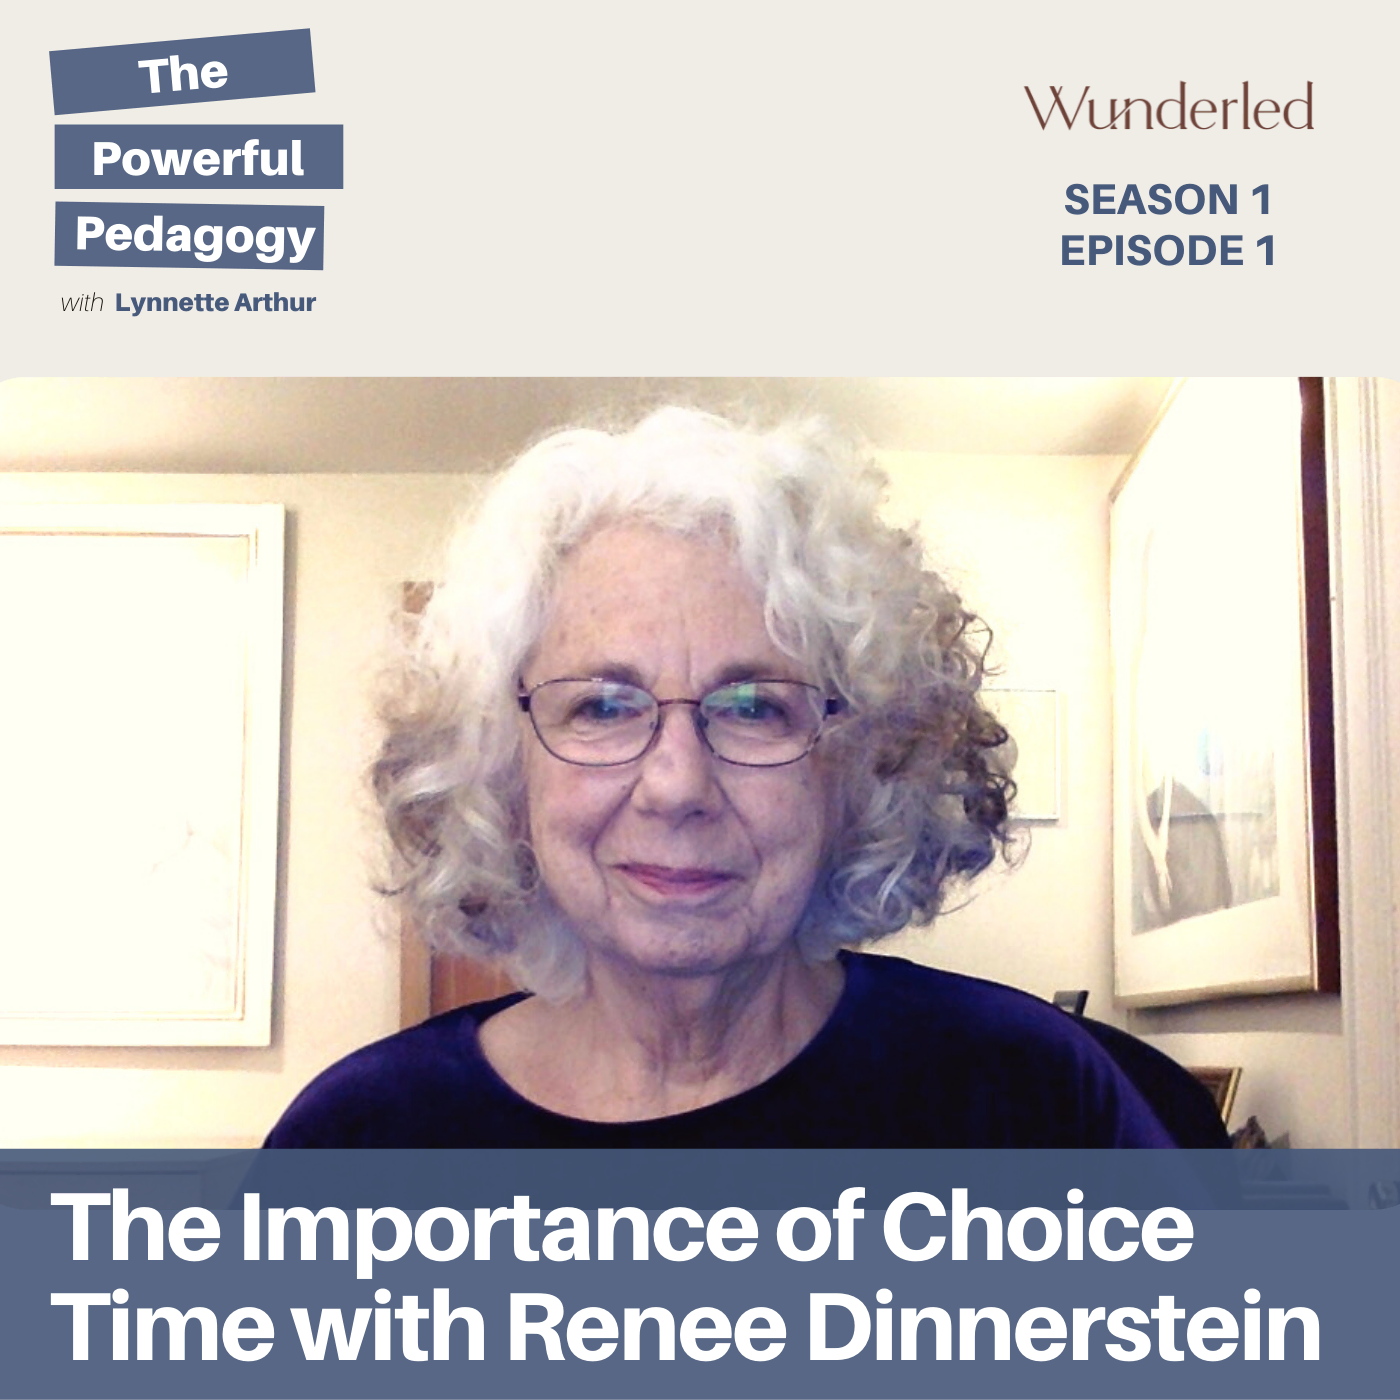 The Powerful Pedagogy Podcast Episode: The Importance of Choice Time with Renee Dinnerstein